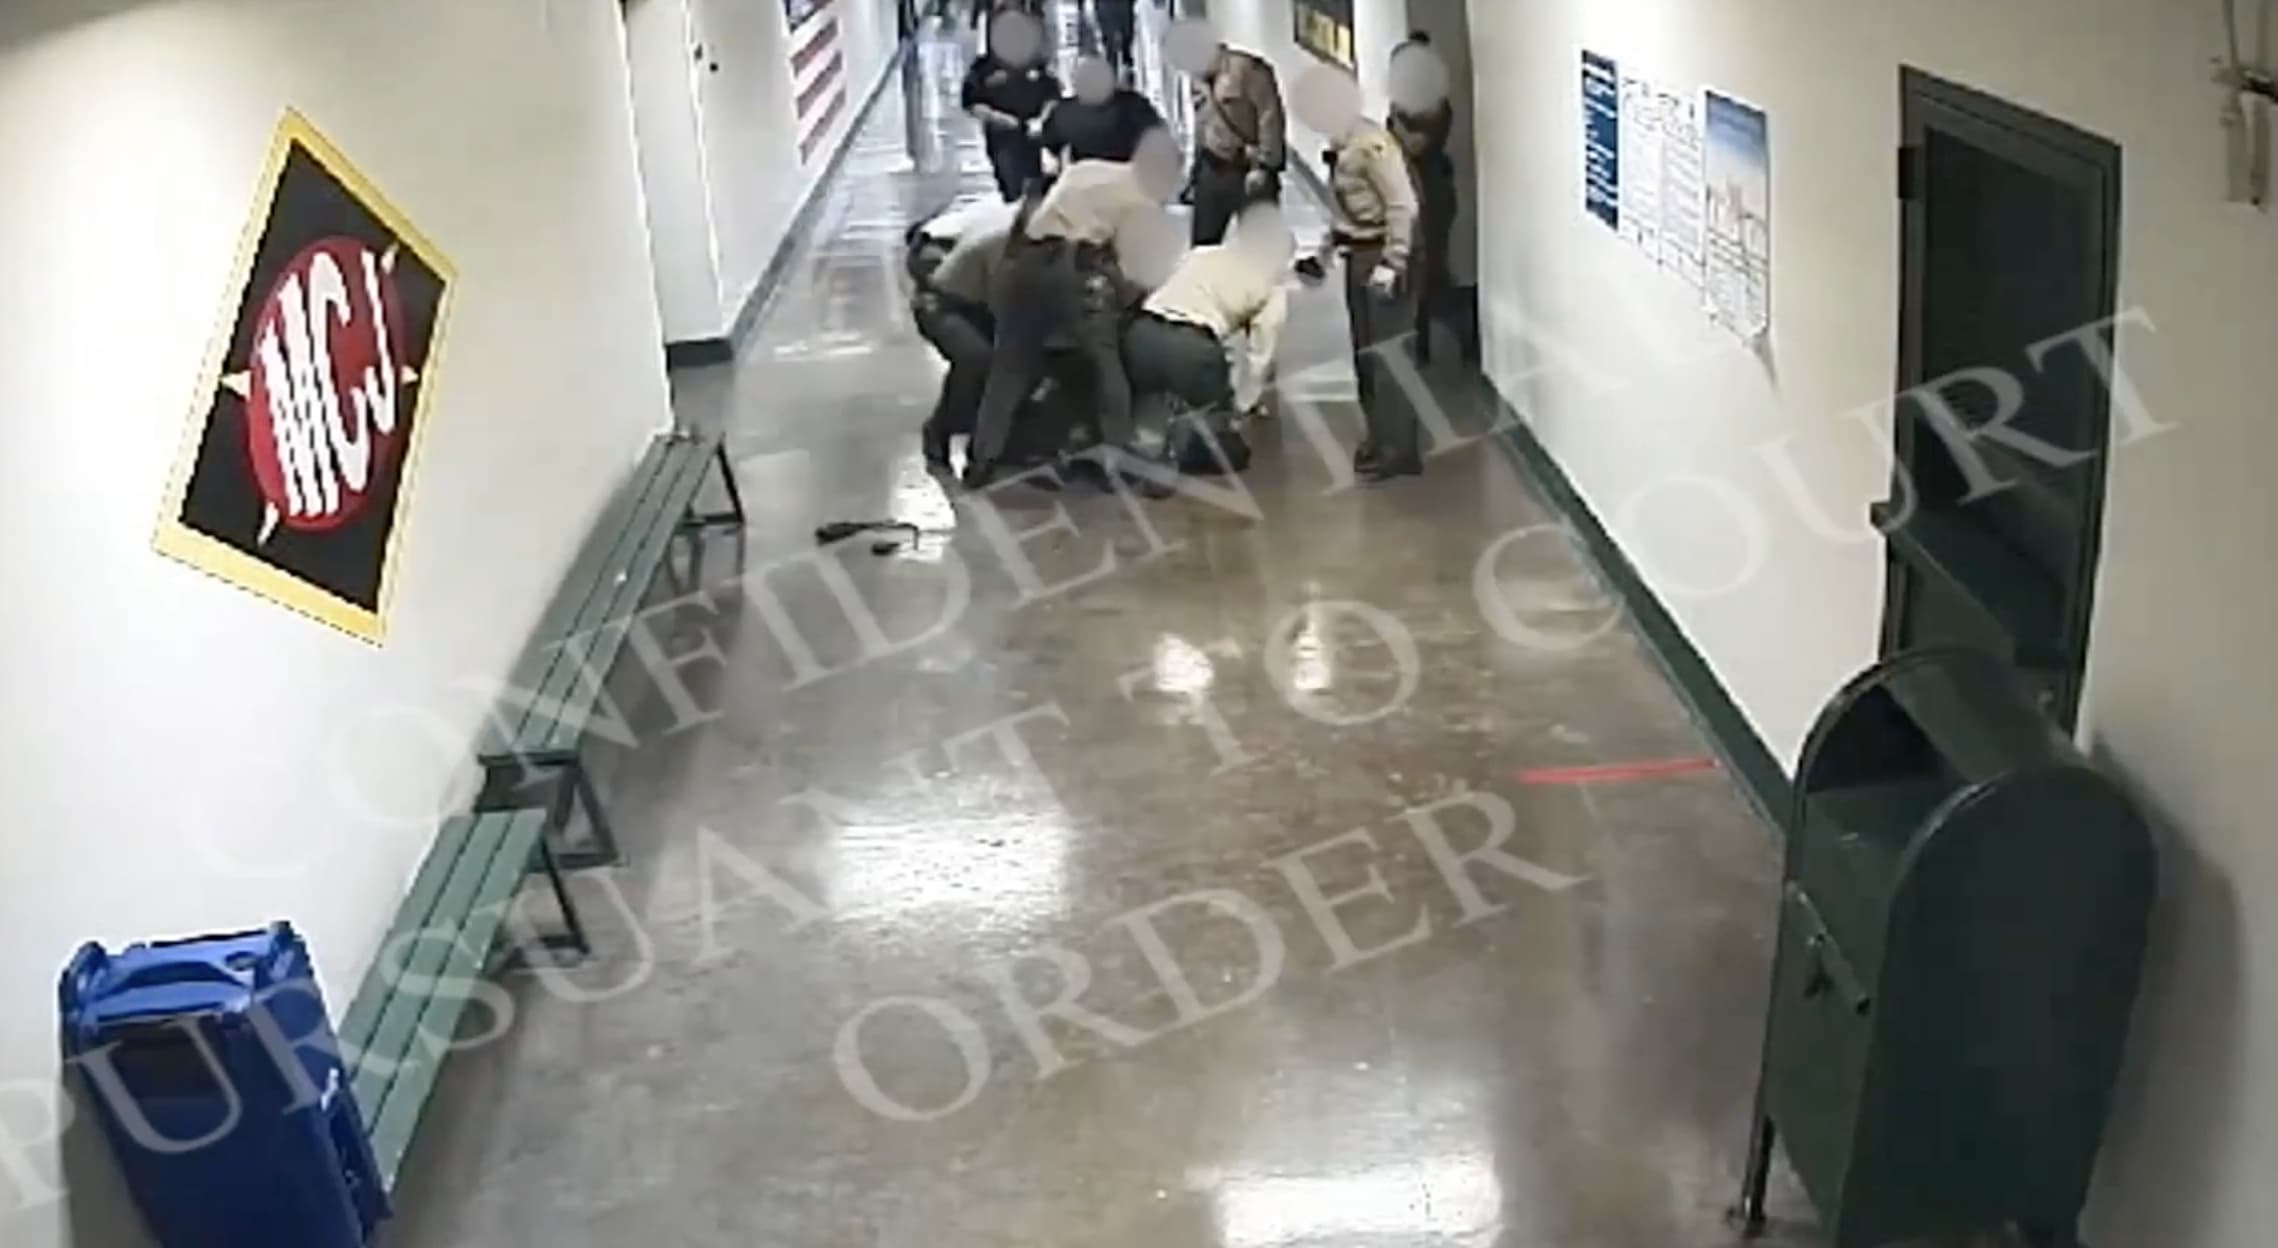 A screen capture from one of several unsealed surveillance videos shows sheriff's deputies kneeling on an inmate's neck inside a Los Angeles County jail.